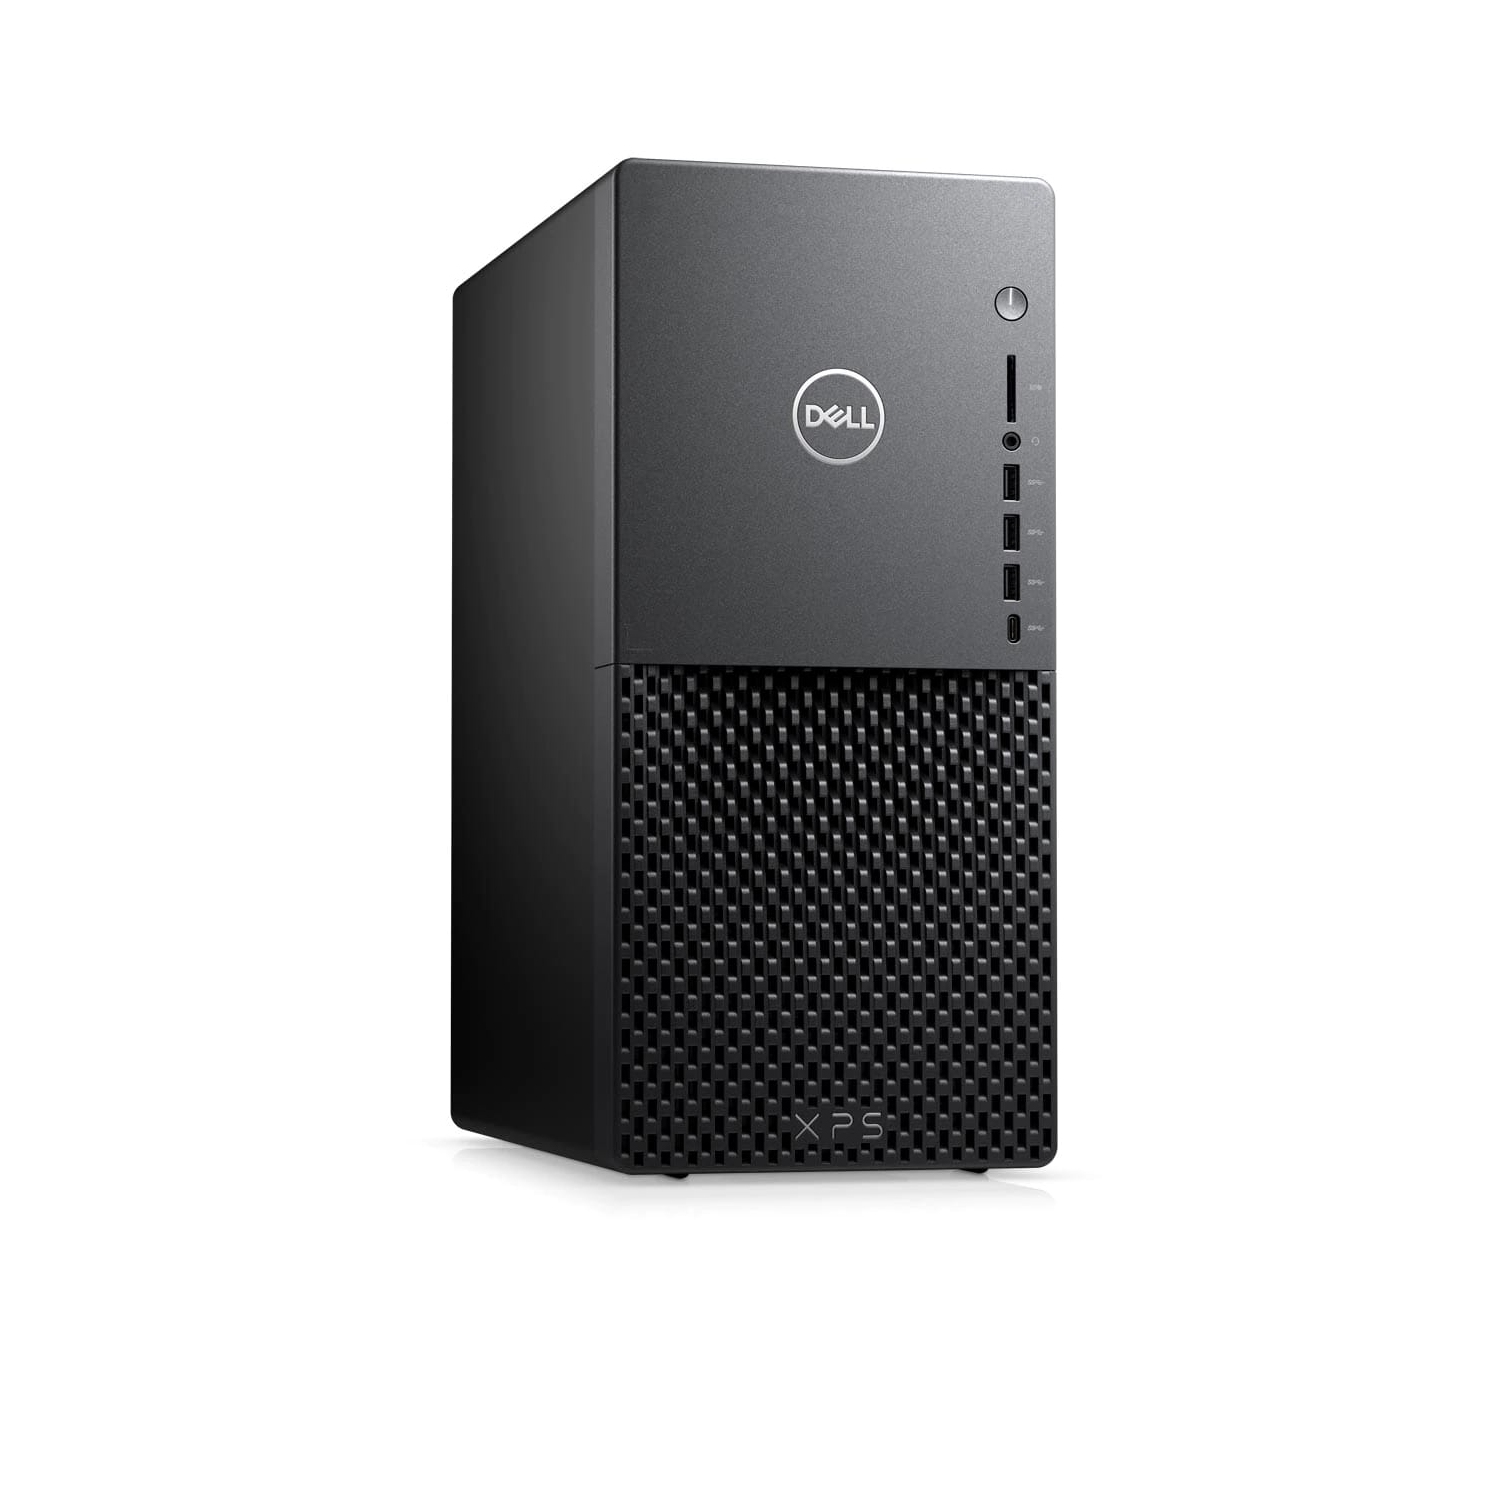 Refurbished (Excellent) - Dell XPS 8940 Desktop (2020) | Core i9 - 2TB SSD - 32GB RAM - RTX 3060 | 8 Cores @ 5.3 GHz - 11th Gen CPU Certified Refurbished